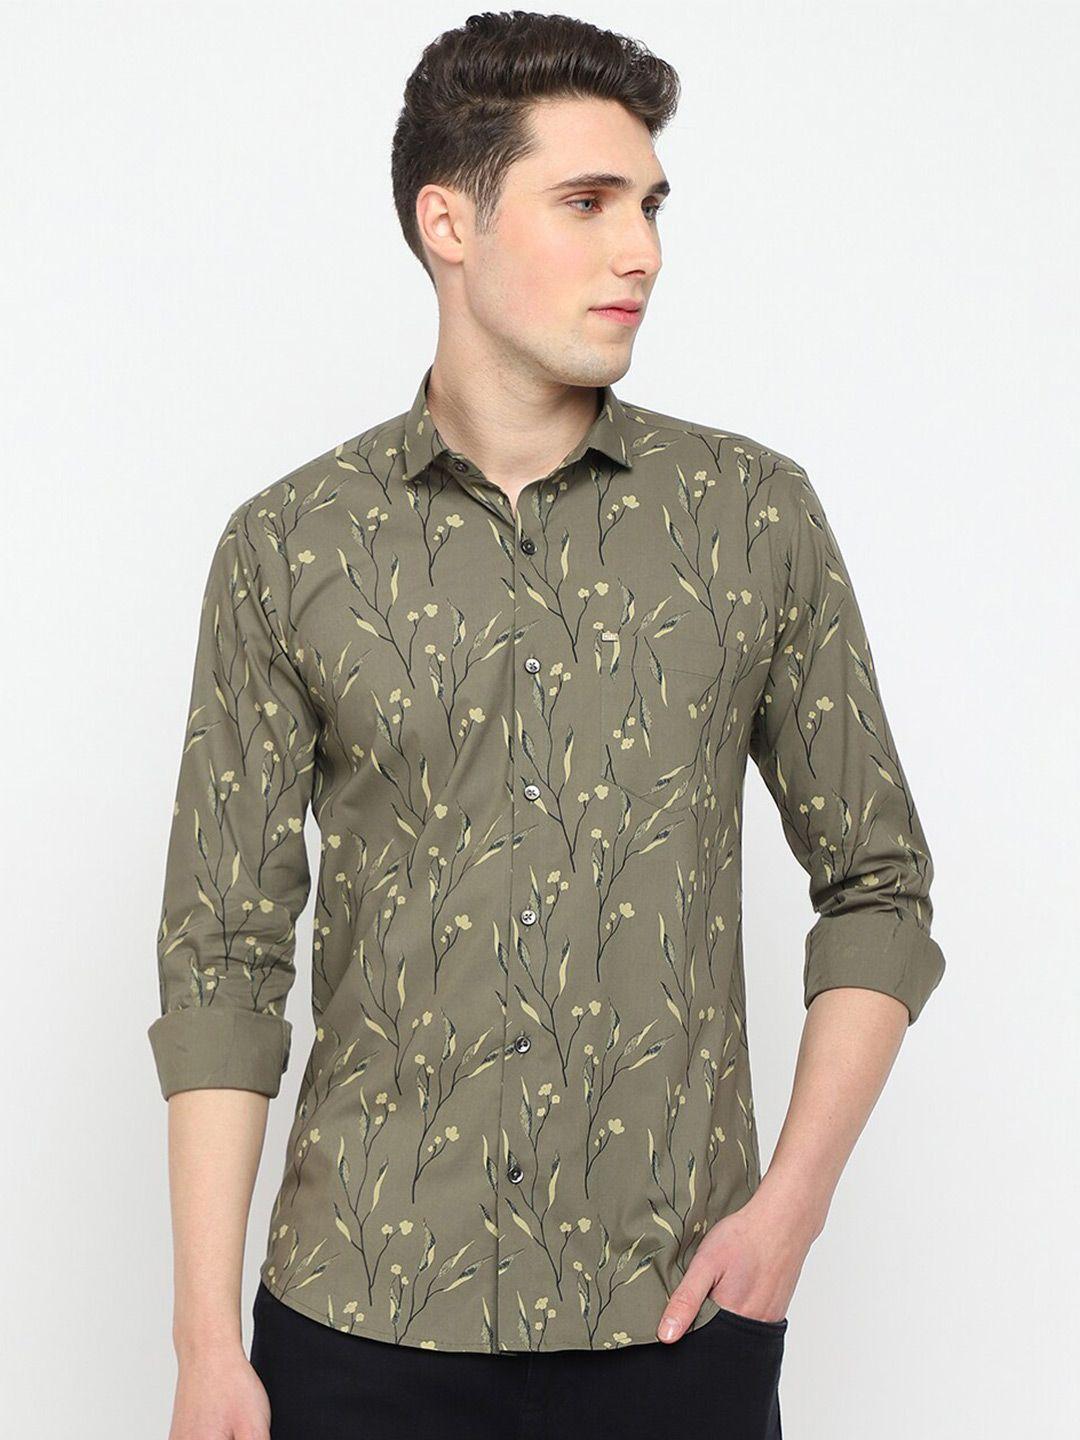 jadeberry-classic-floral-opaque-printed-cotton-casual-shirt